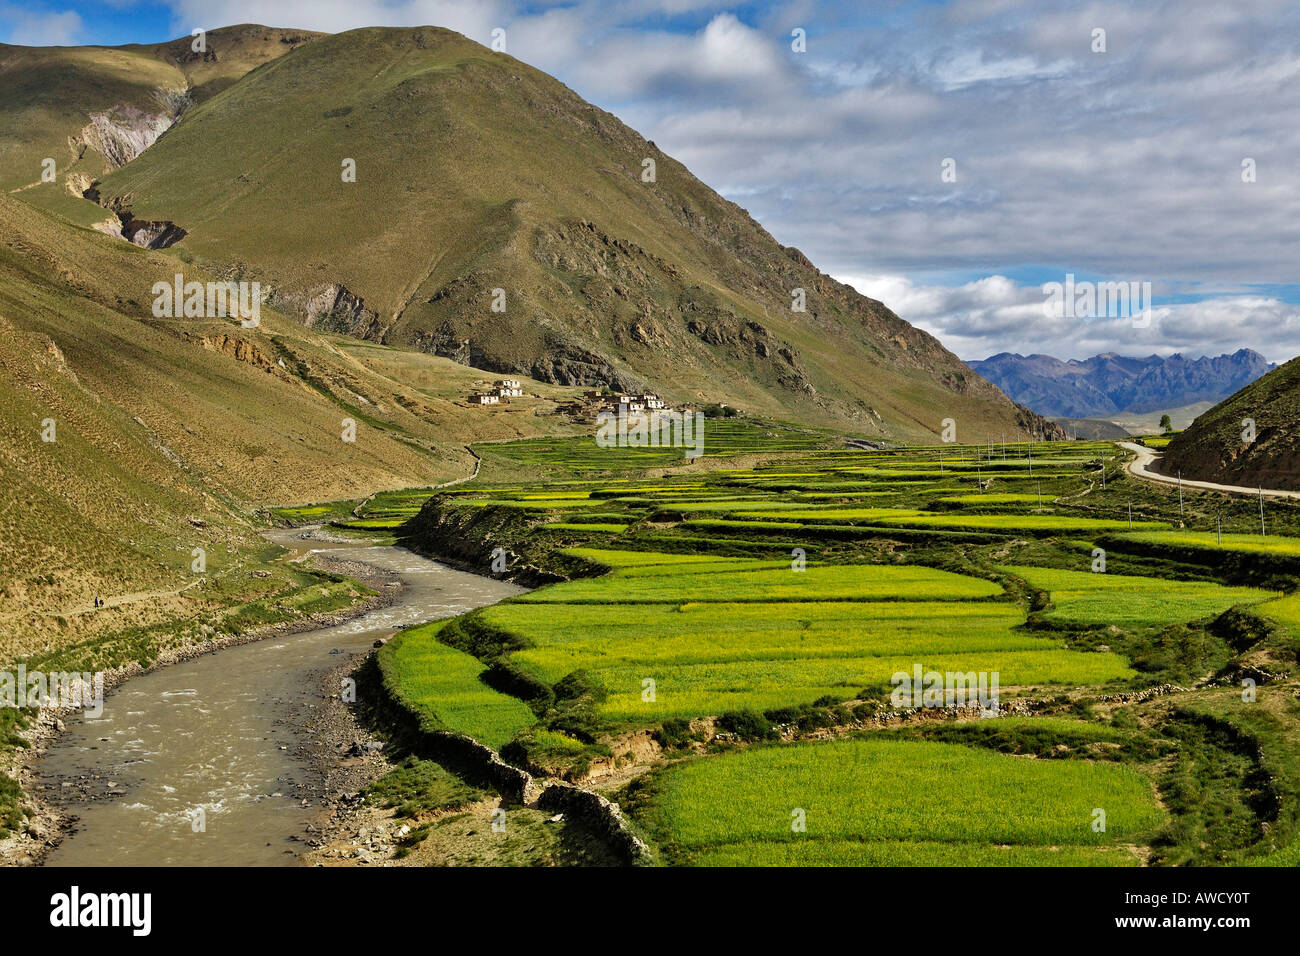 View of river and fertile valley, mountains with erosional damage, between Gyantse and Dangxiong, Tibet Stock Photo